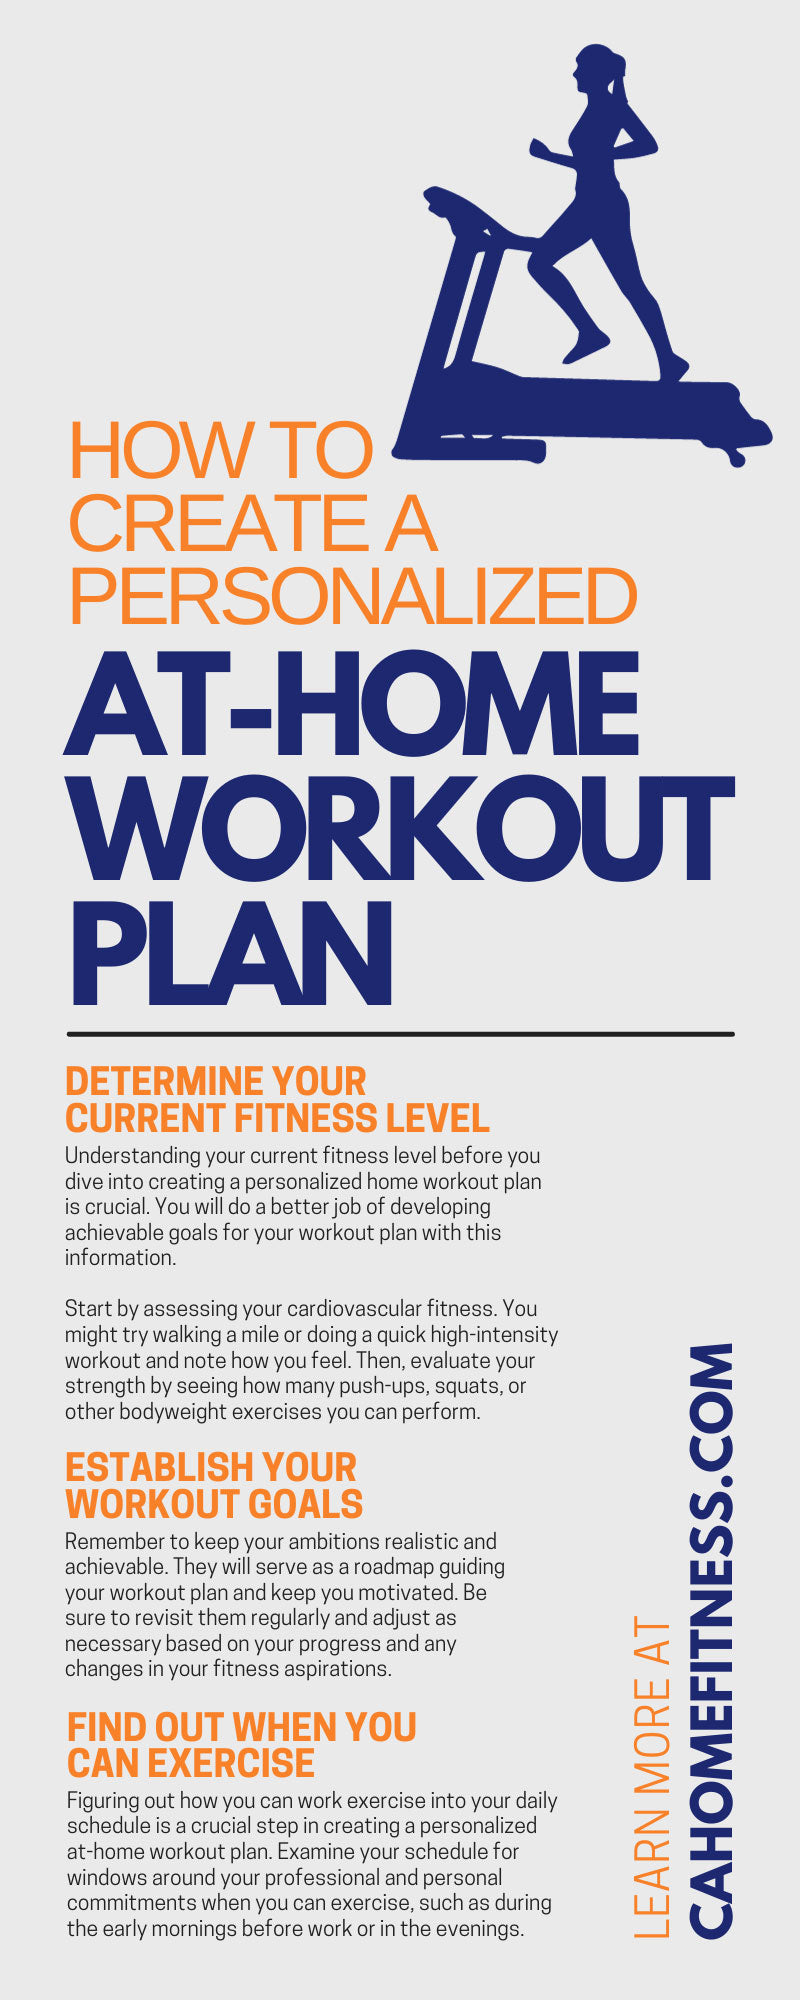 How To Create a Personalized At-Home Workout Plan